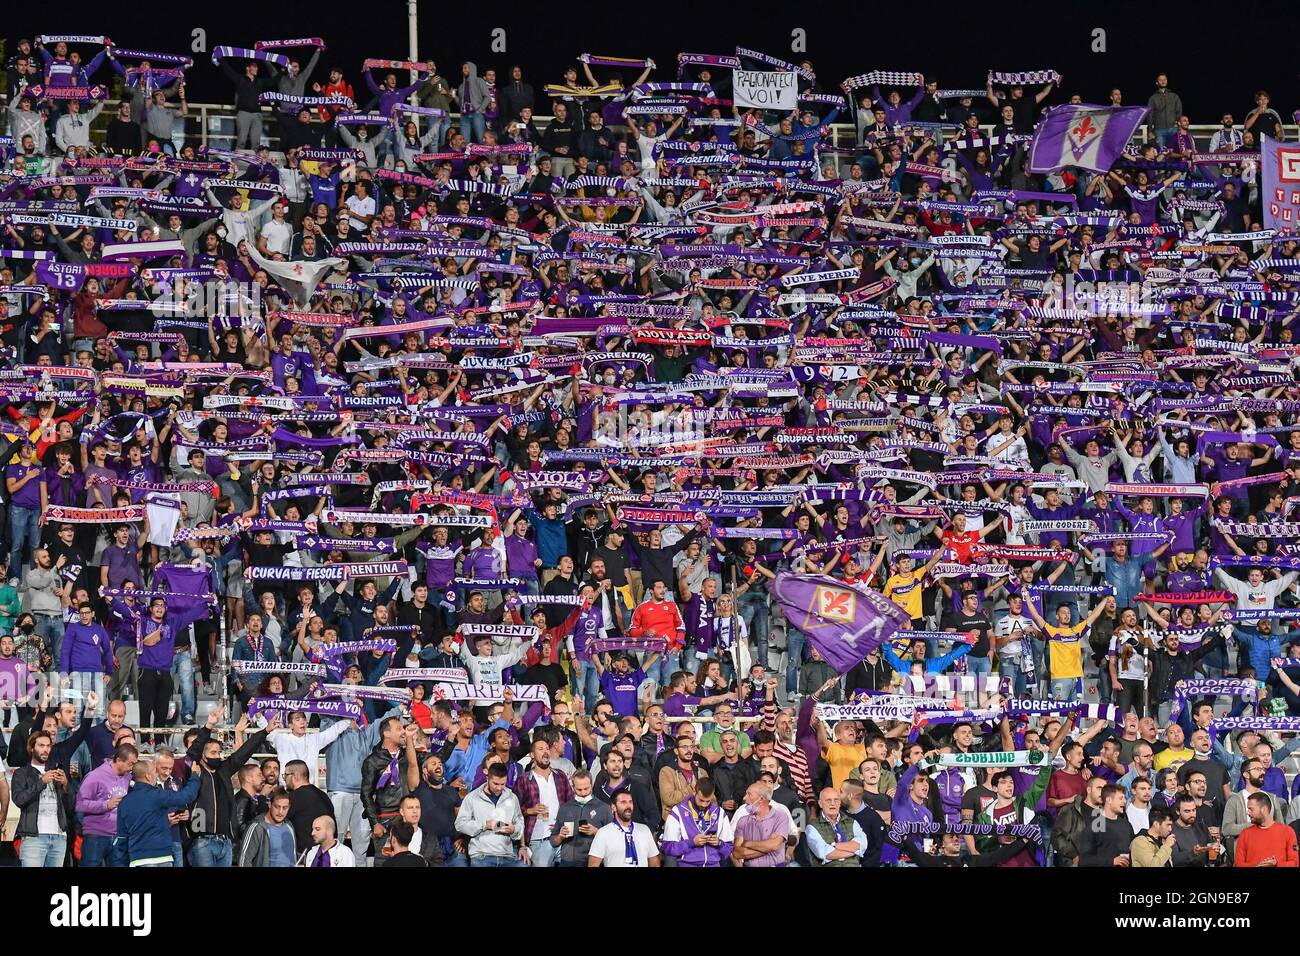 Inter Fiorentina High Resolution Stock Photography and Images - Alamy